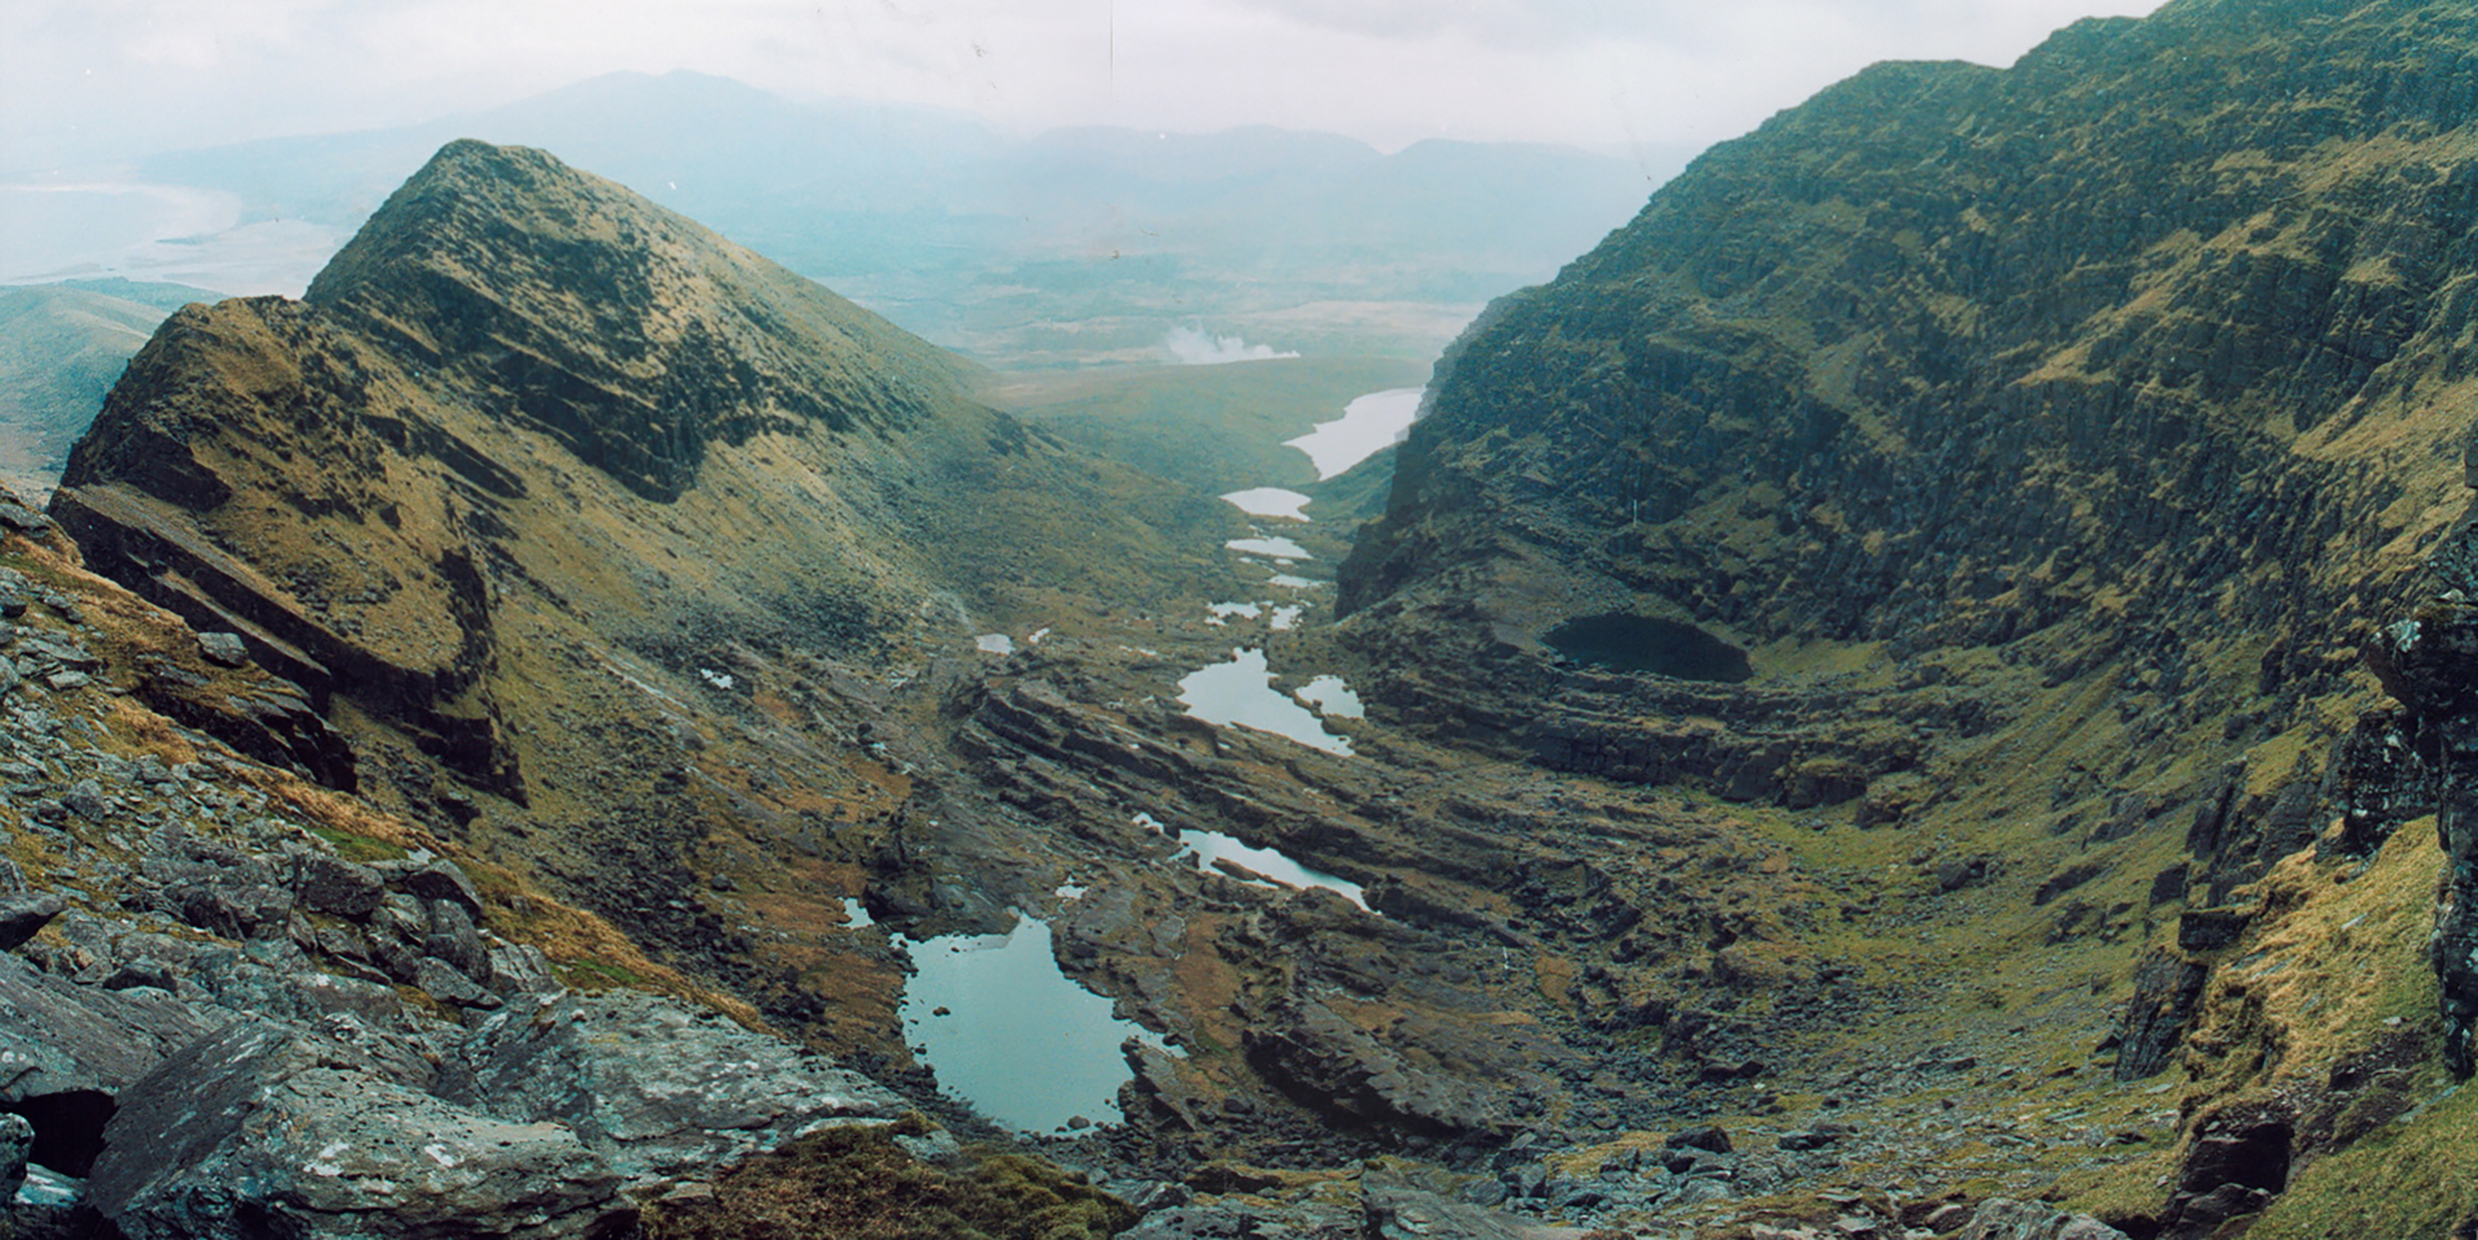 Image of a rocky mountain valley with a chain of small lakes